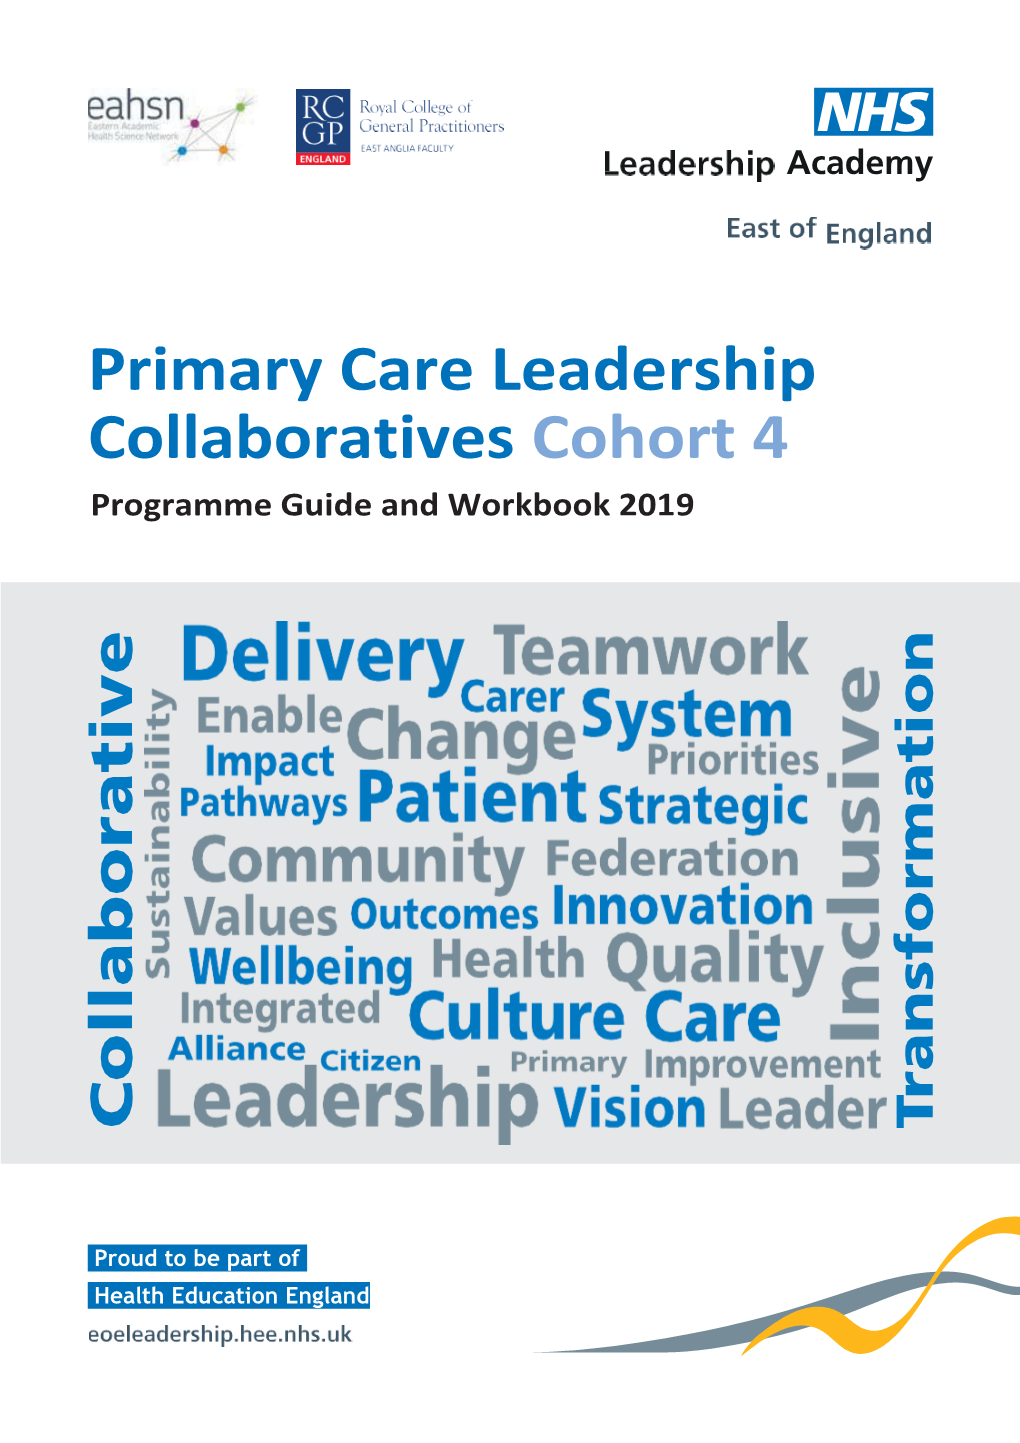 Primary Care Leadership Collaboratives Cohort 4 Programme Guide and Workbook 2019